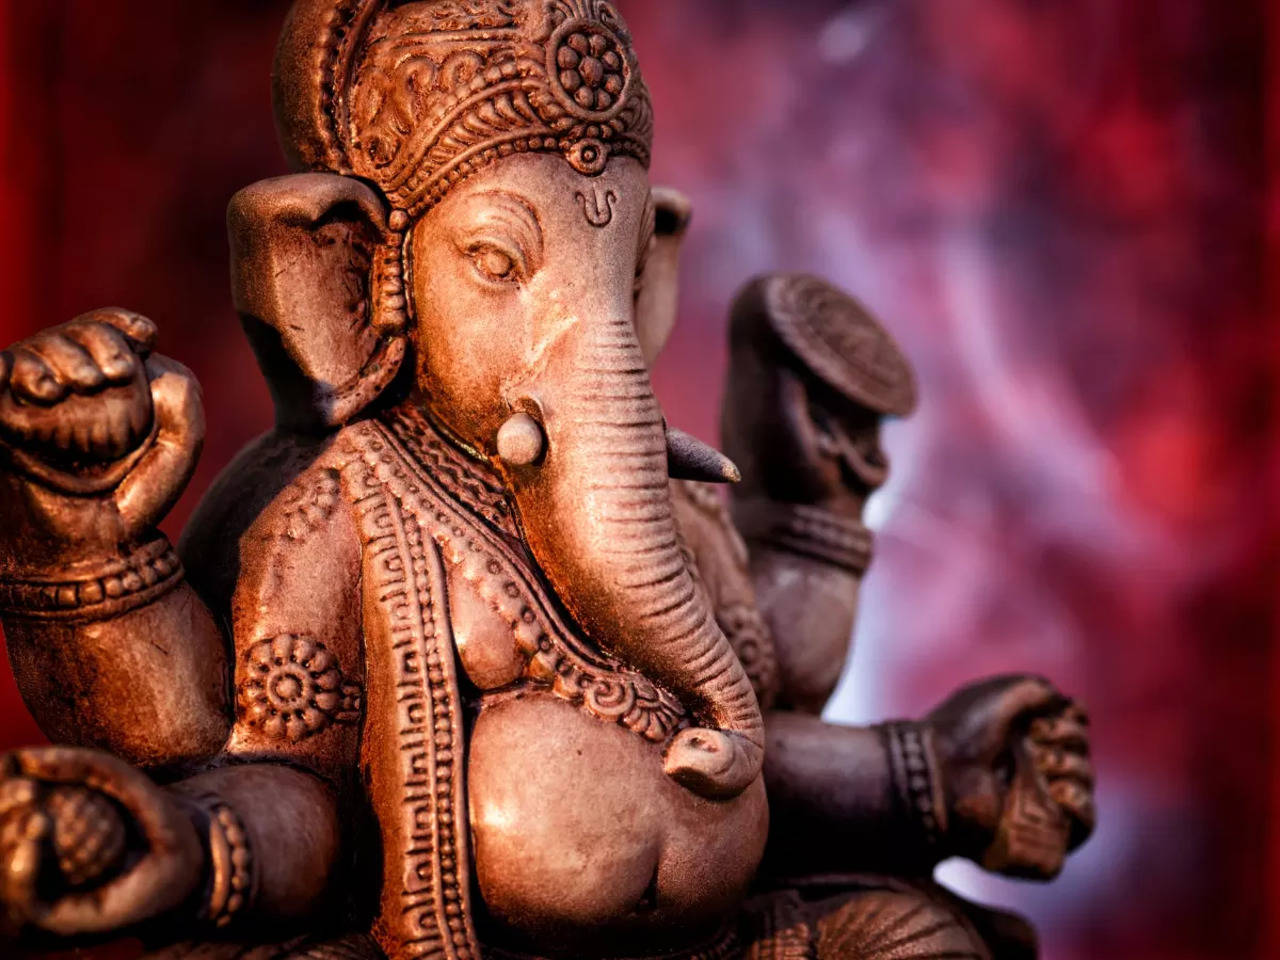 “An Amazing Collection of Full 4K Vinayaka Images: Over 999+ to Choose From!”